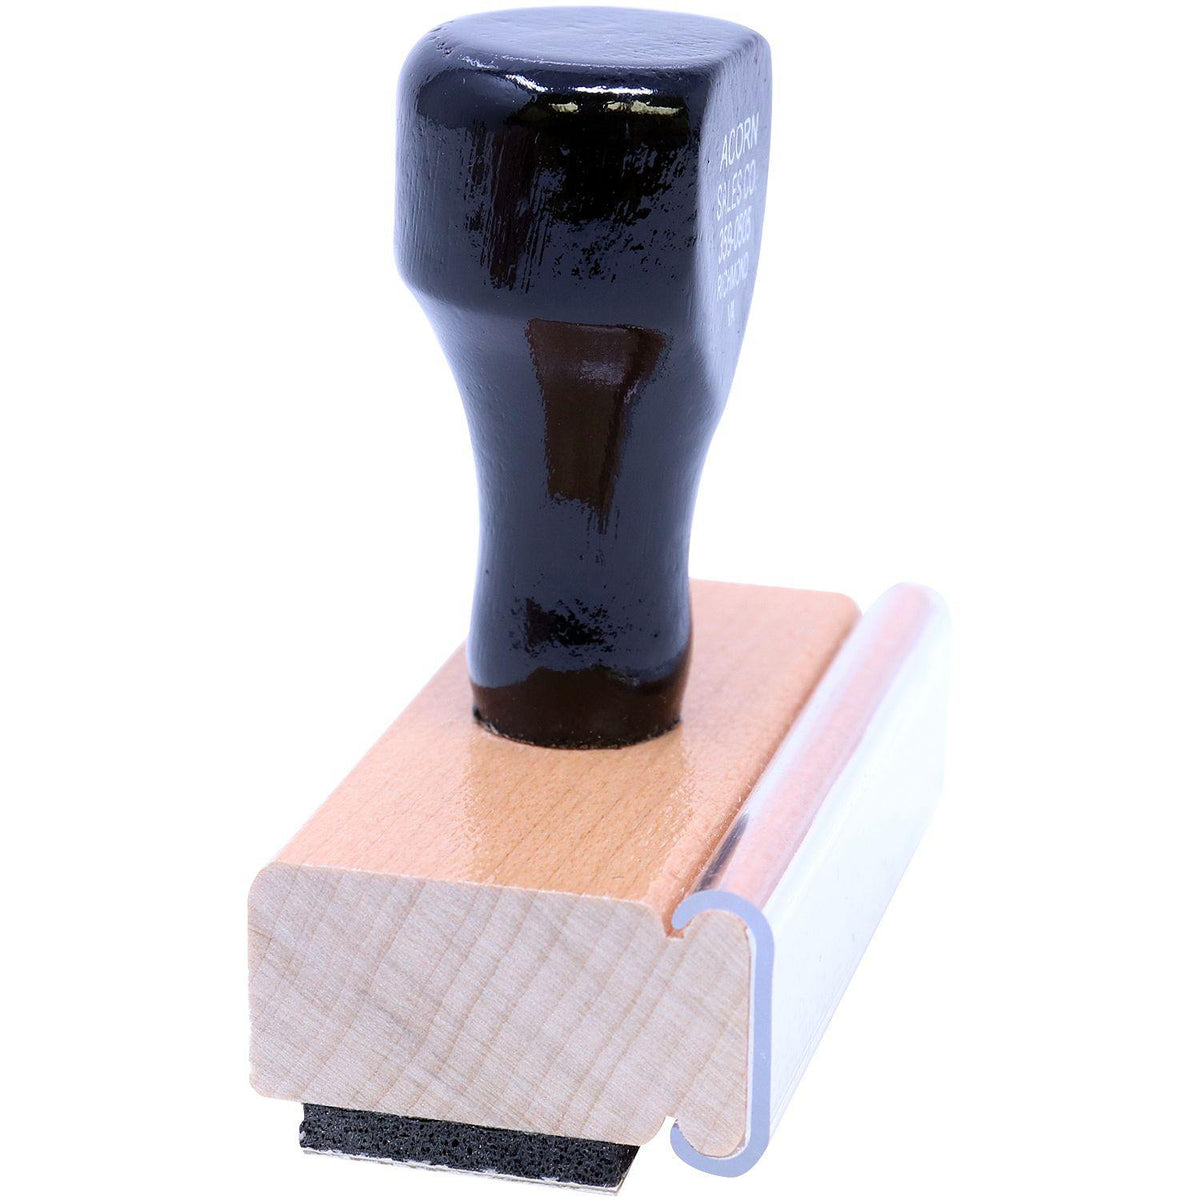 Side View of Large Confidential with Envelope Rubber Stamp at an Angle